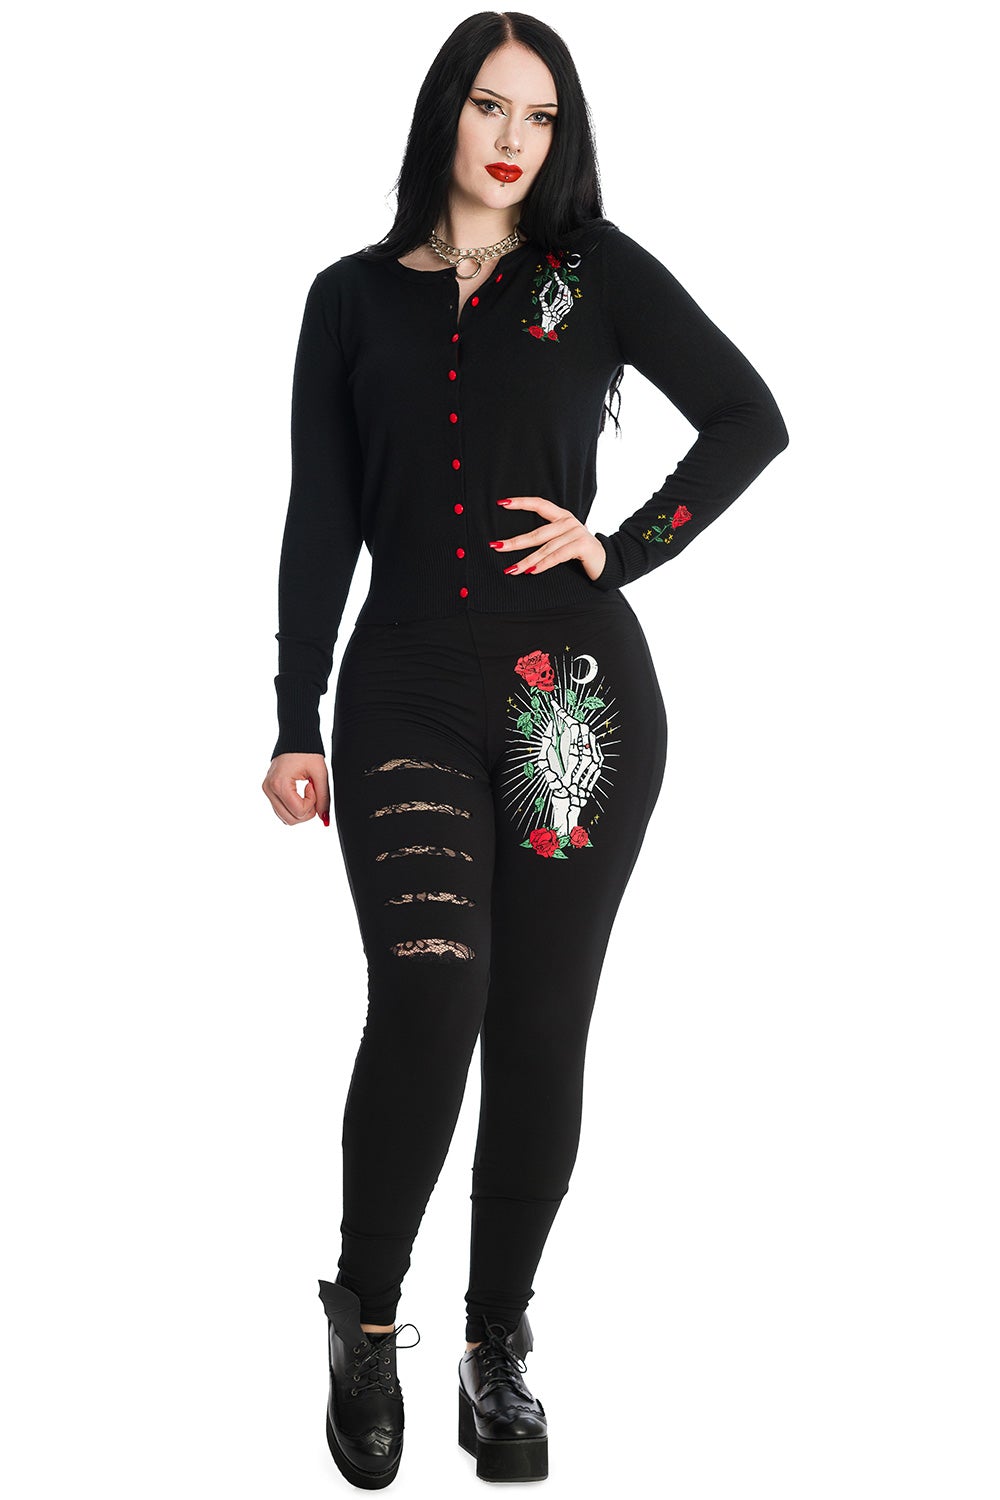 Alternative model wearing black button up cardigan with skeleton hand holding a red rose feature on left chest with matching roses on the sleeves and red buttons. Model wears matching leggings. 